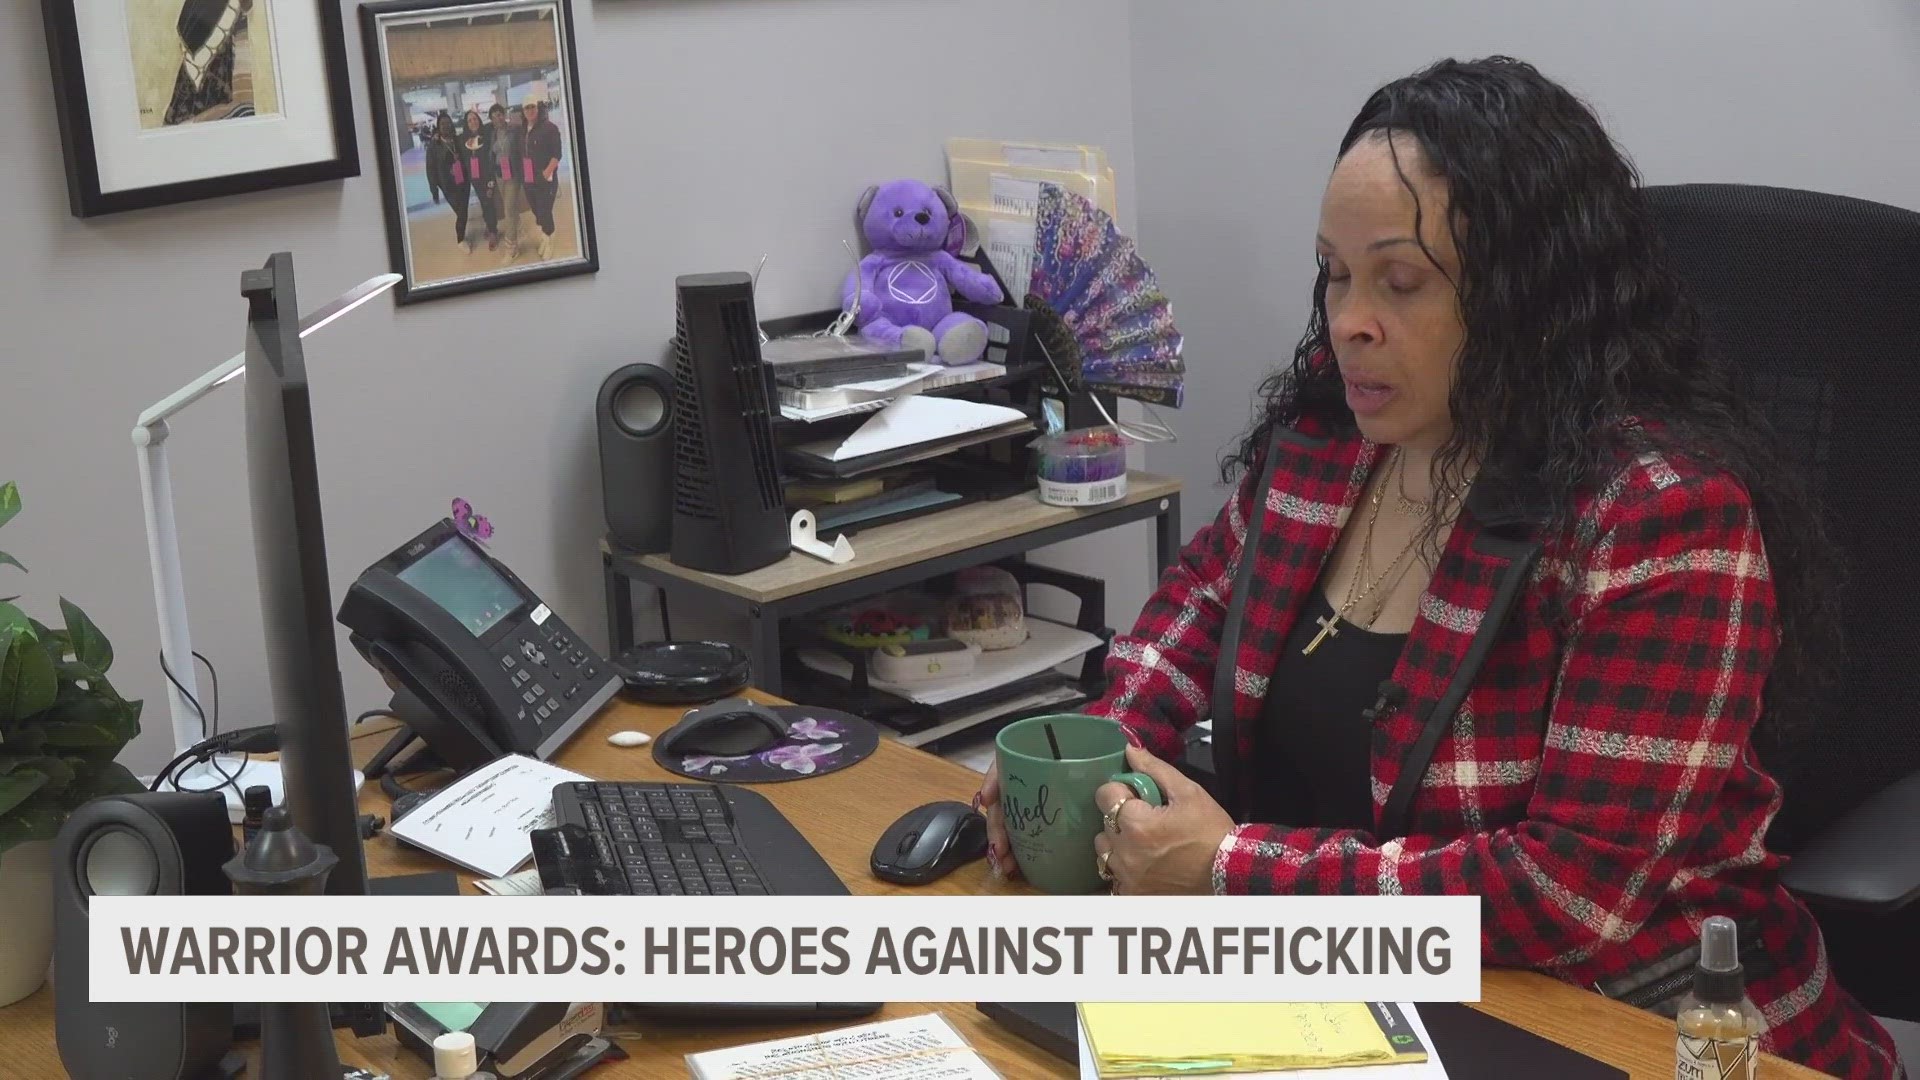 January is Human Trafficking Prevention Month. Friday, a local organization will recognize those considered warriors in the fight against human trafficking.